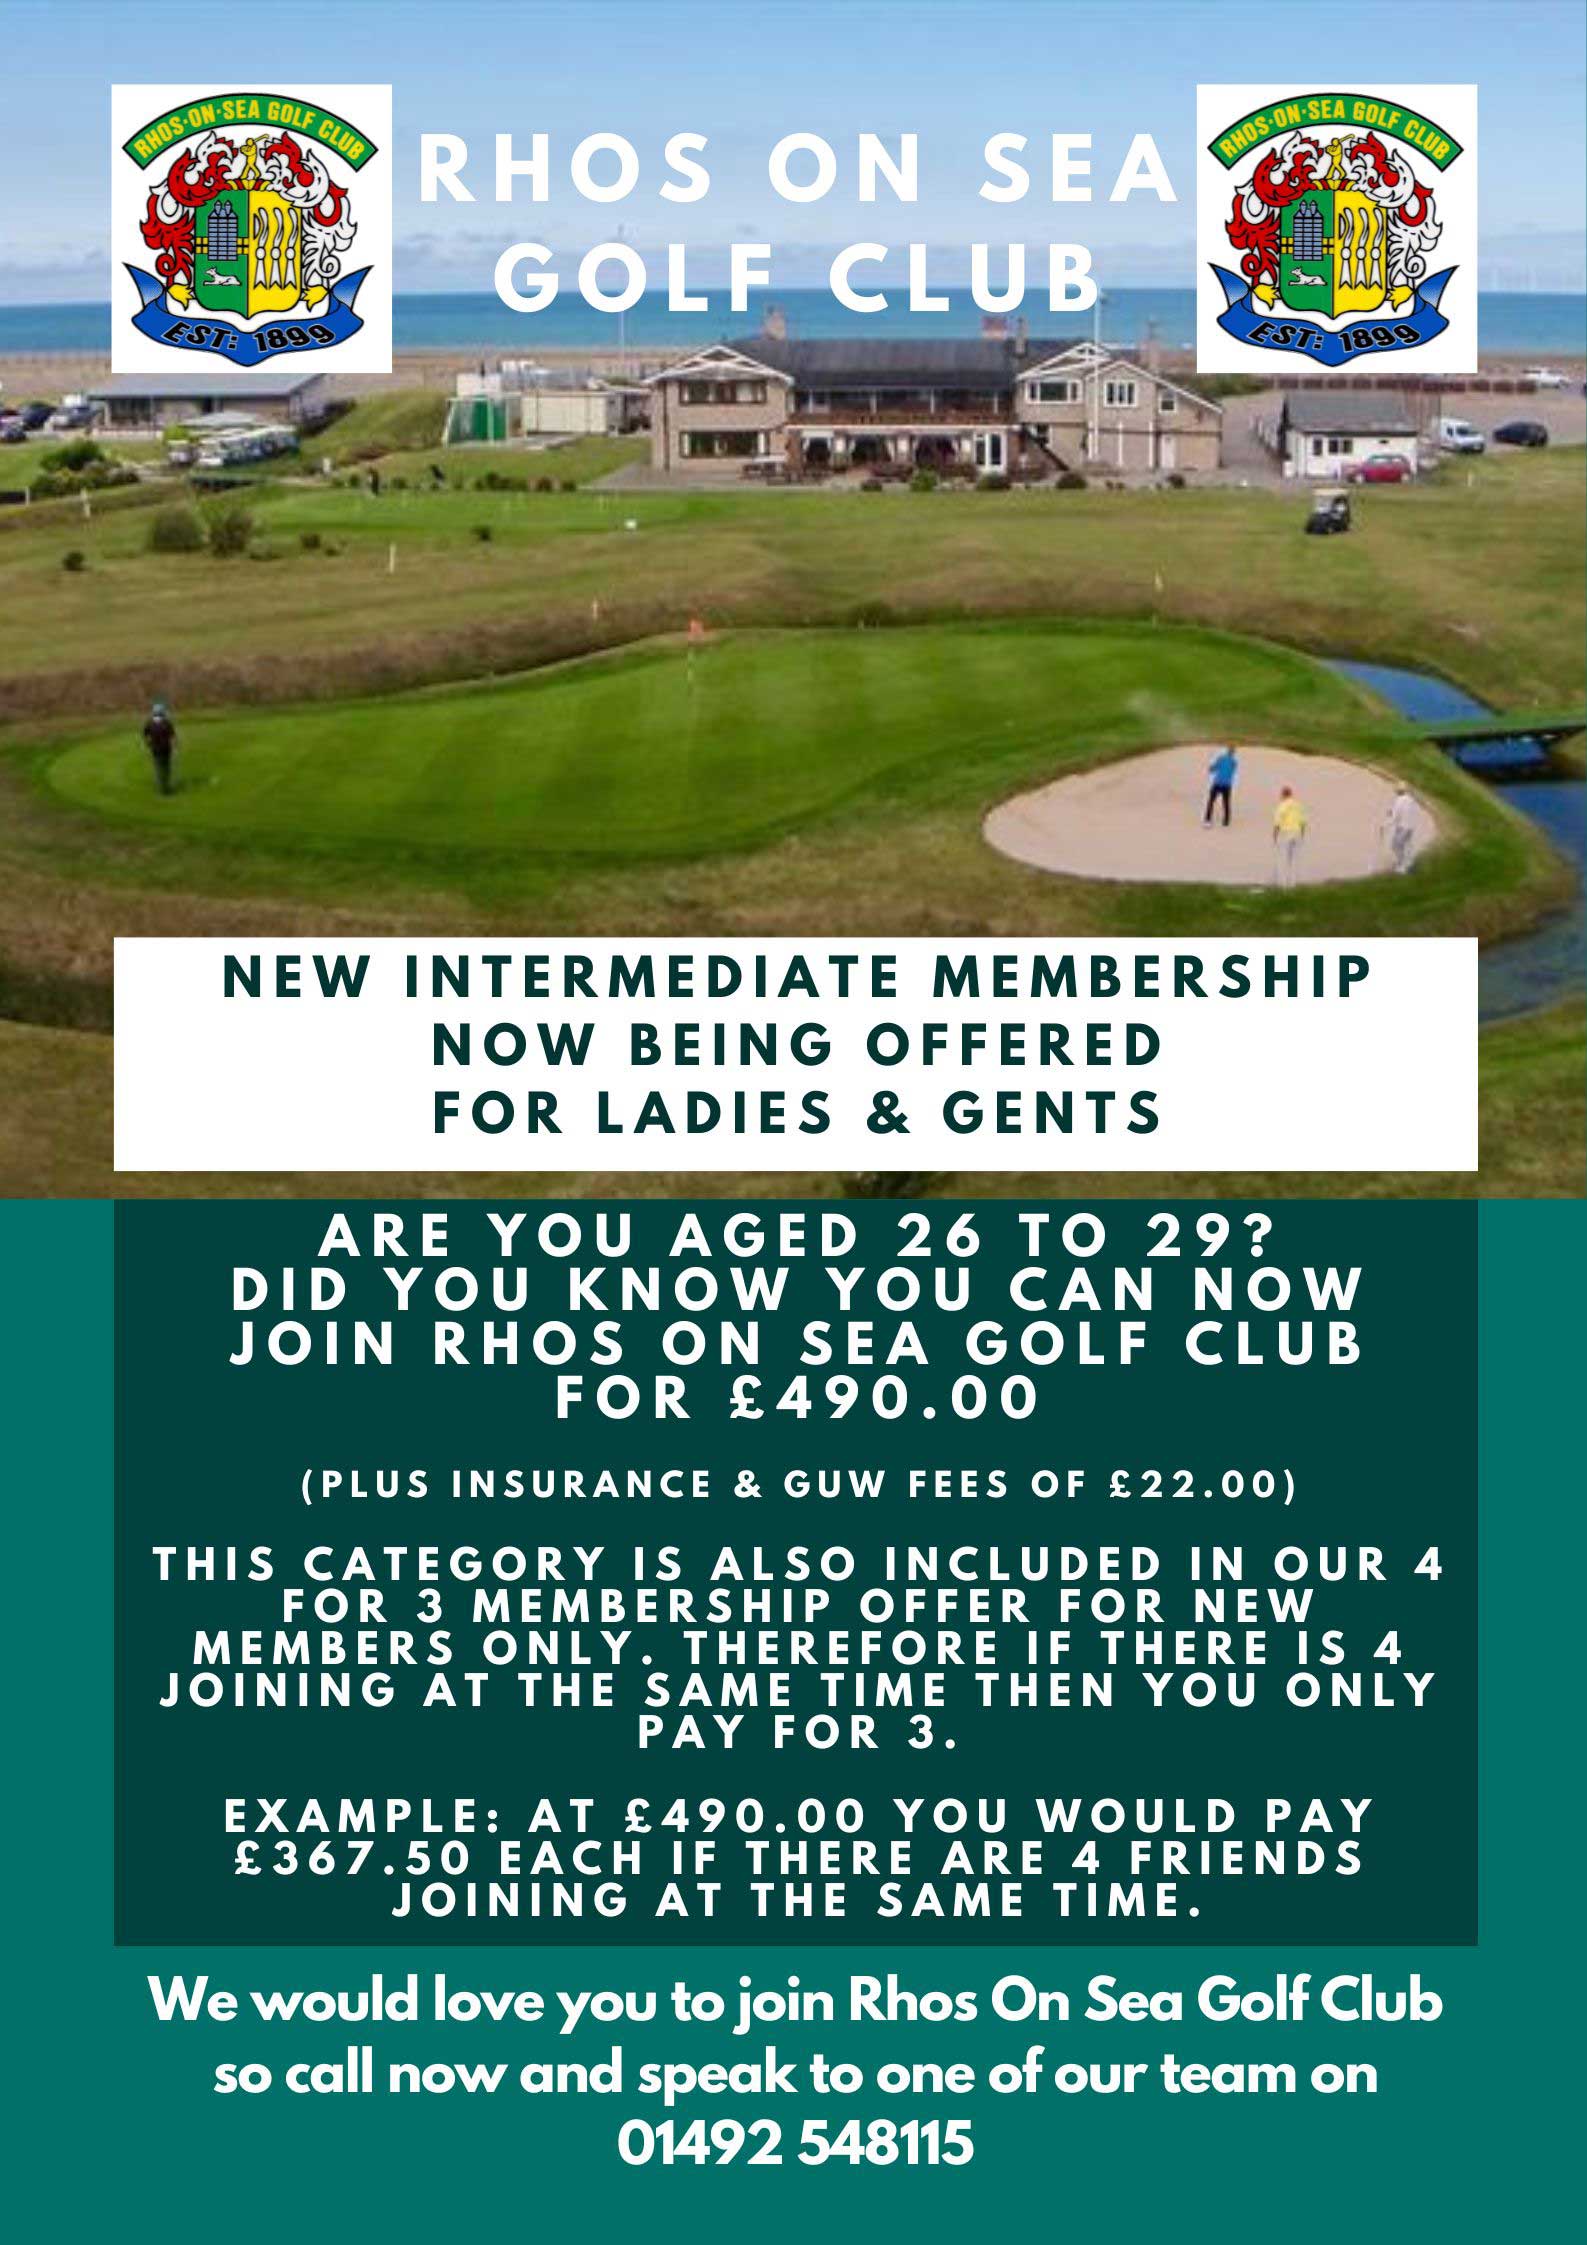 NEW INTERMEDIATE MEMBERSHIP NOW BEING OFFERED FOR LADIES & GENTS